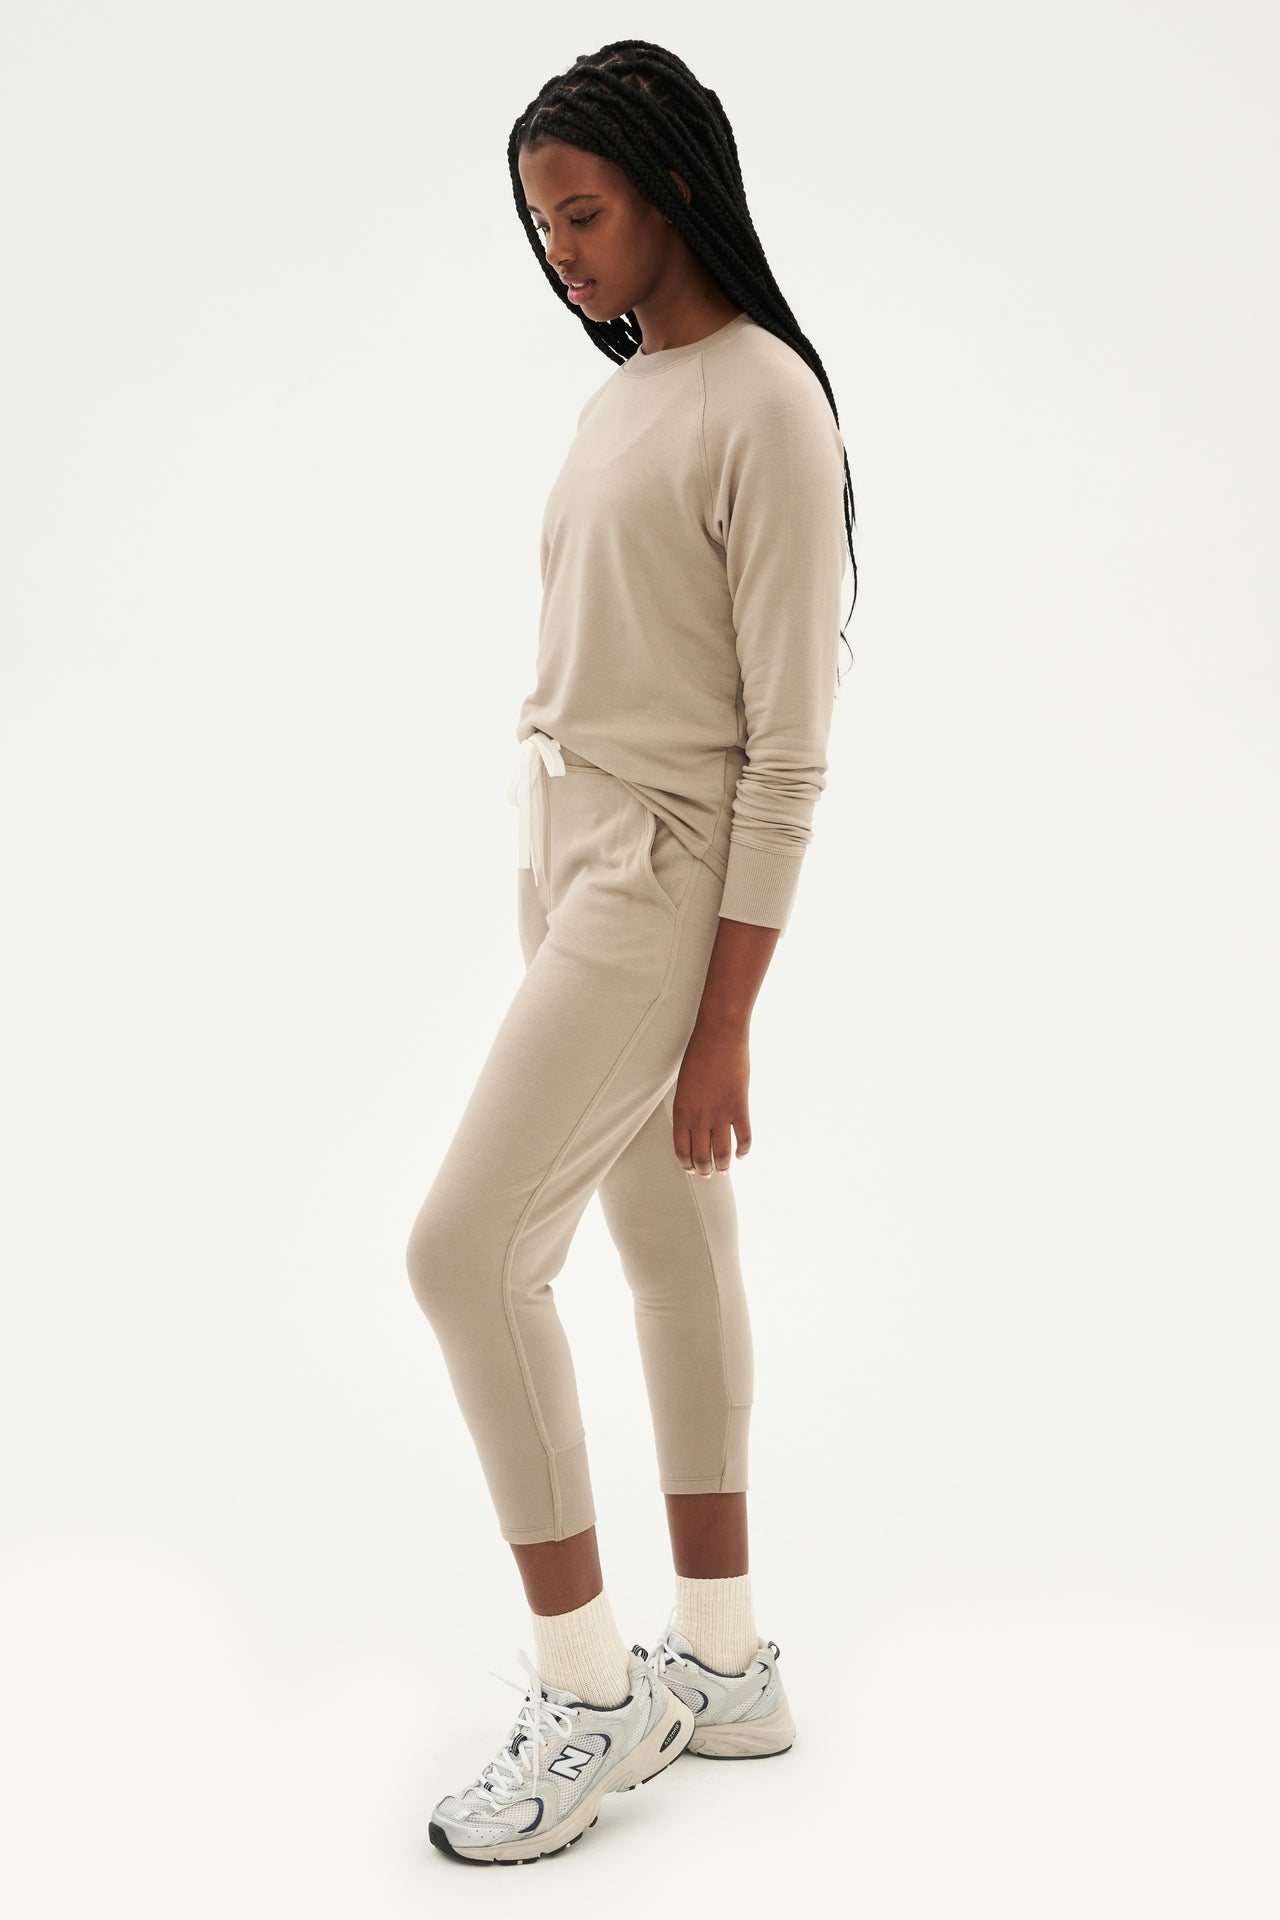 Front side view of woman with black braids wearing light brown creme tone crewneck sweatshirt and sweatpant with tapered leg and above ankle length with white drawstring paired with white shoes with black stripes